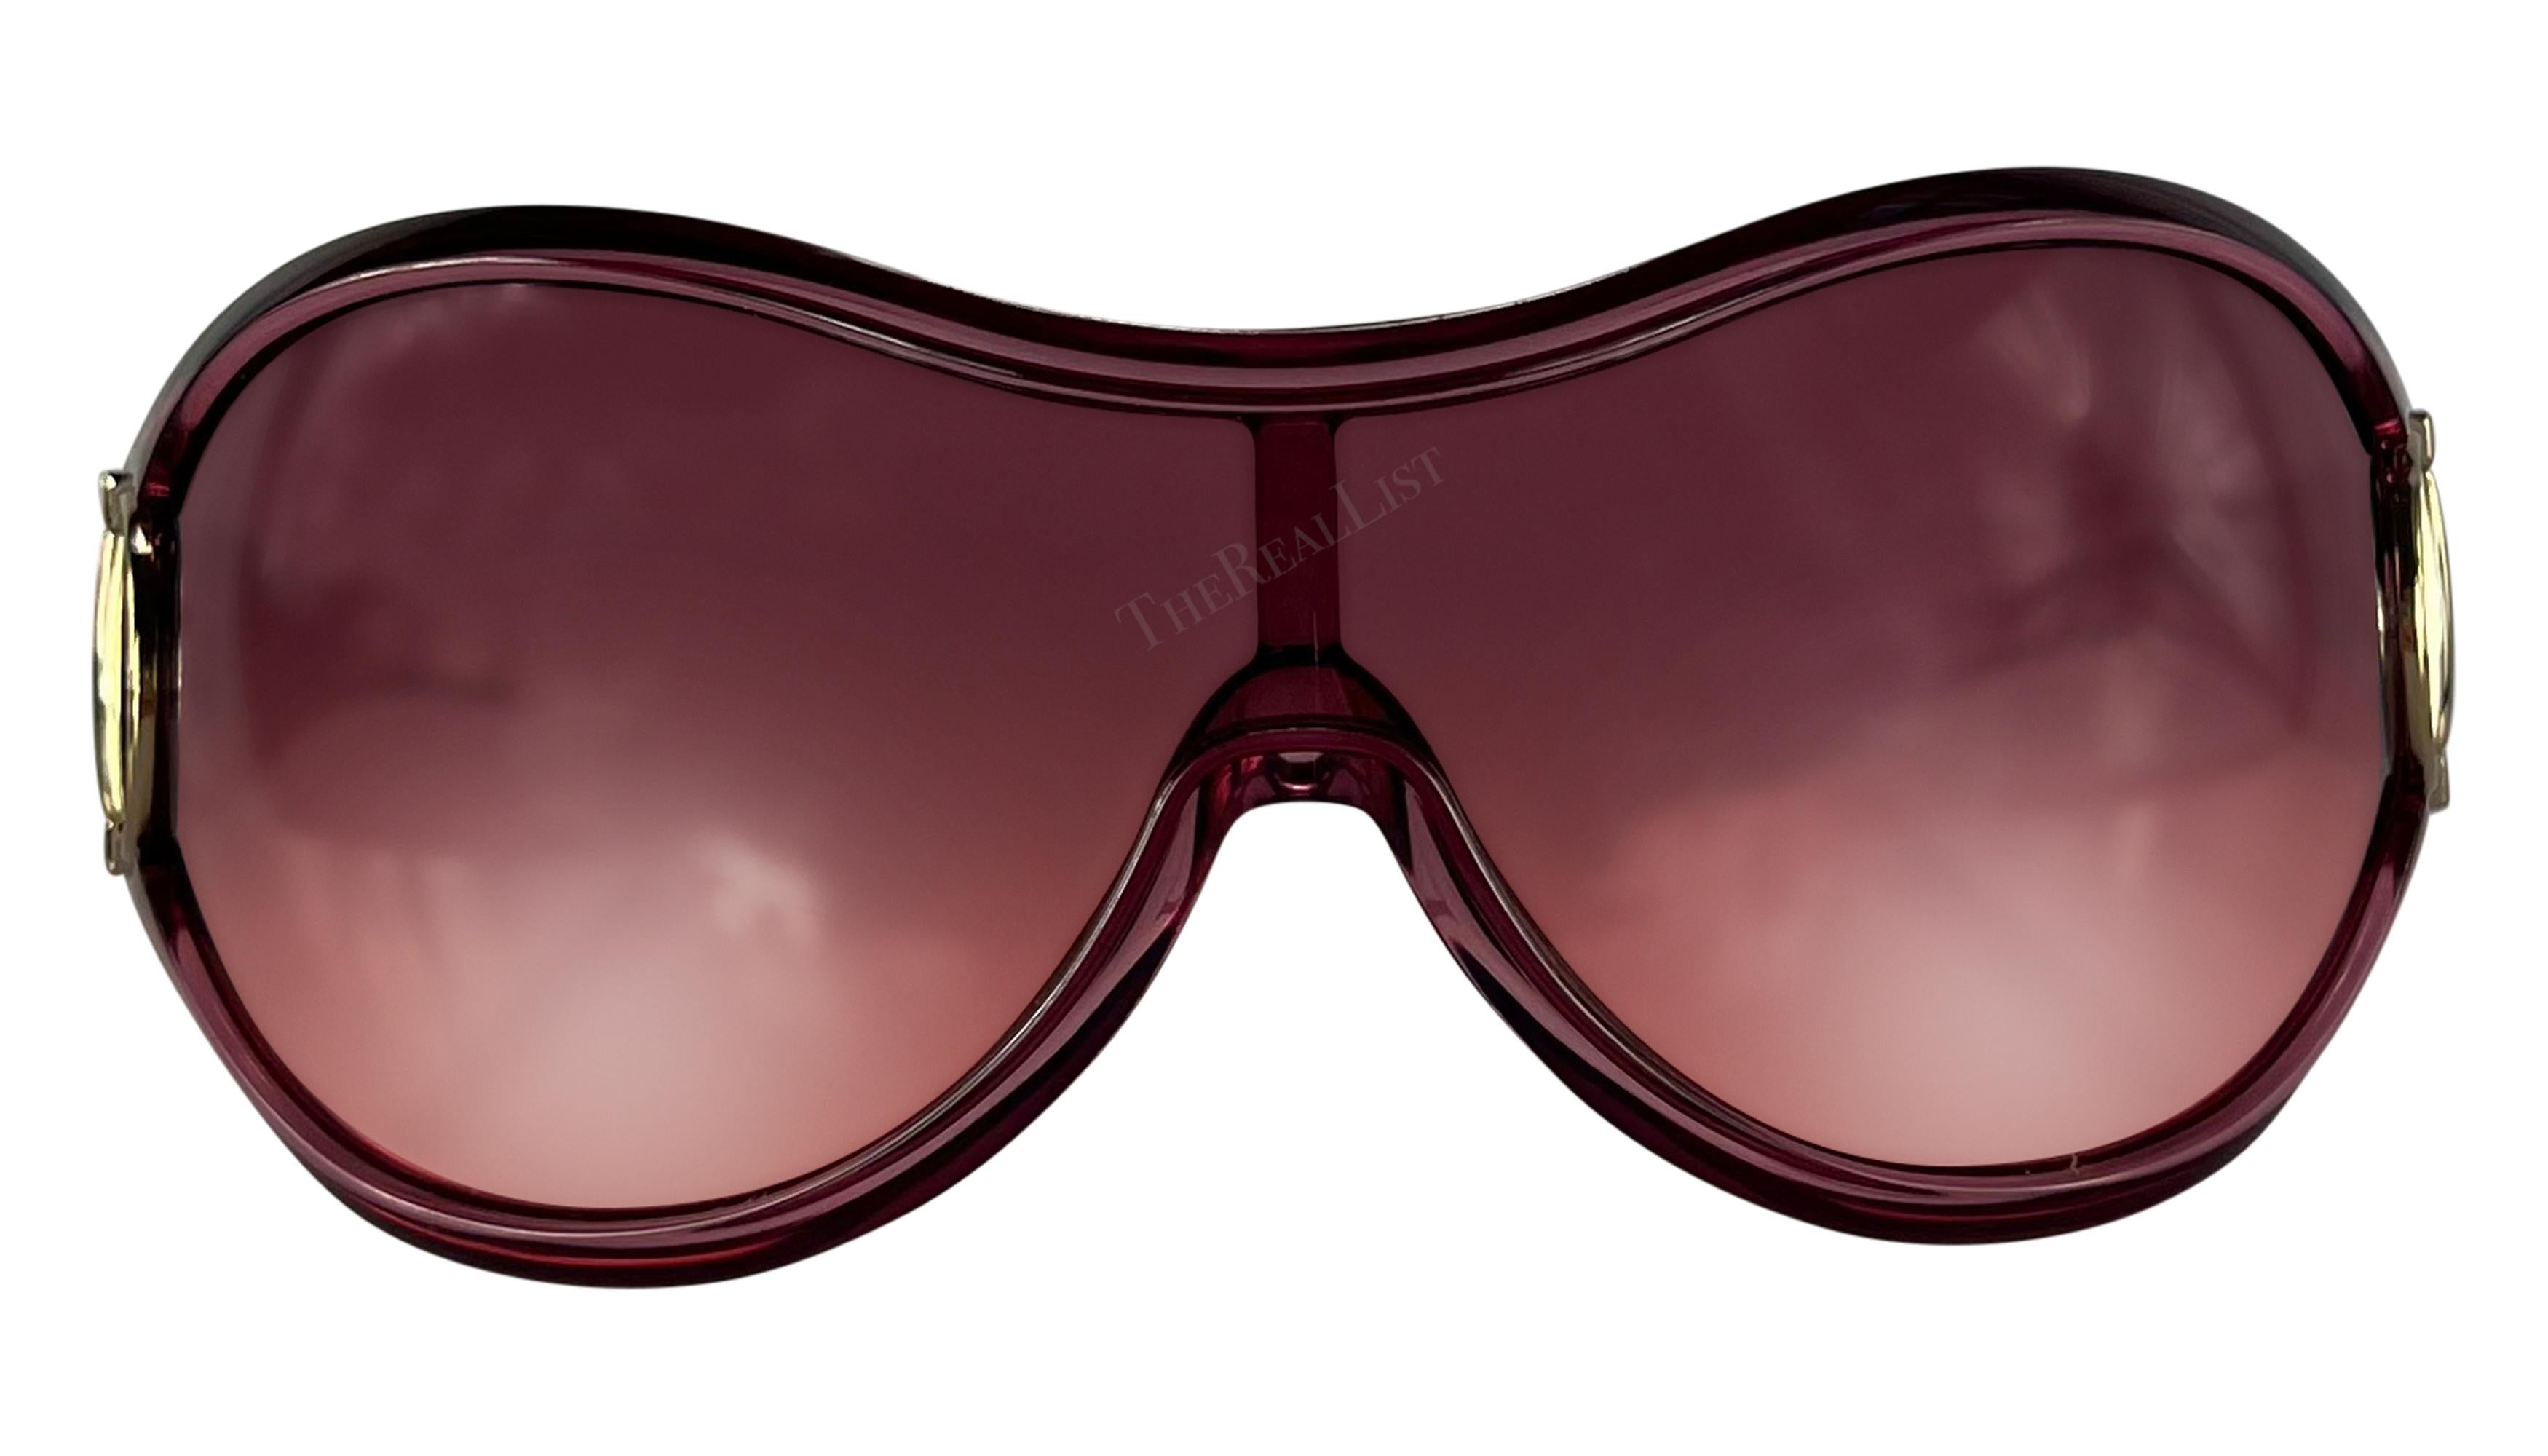 Presenting a fabulous pair of light pink Gucci shield sunglasses. From the mid-2000s, these oversized shield sunglasses feature a transparent light pink frame, a pink lens, and are made complete with metal silver-tone horse bit accents on either